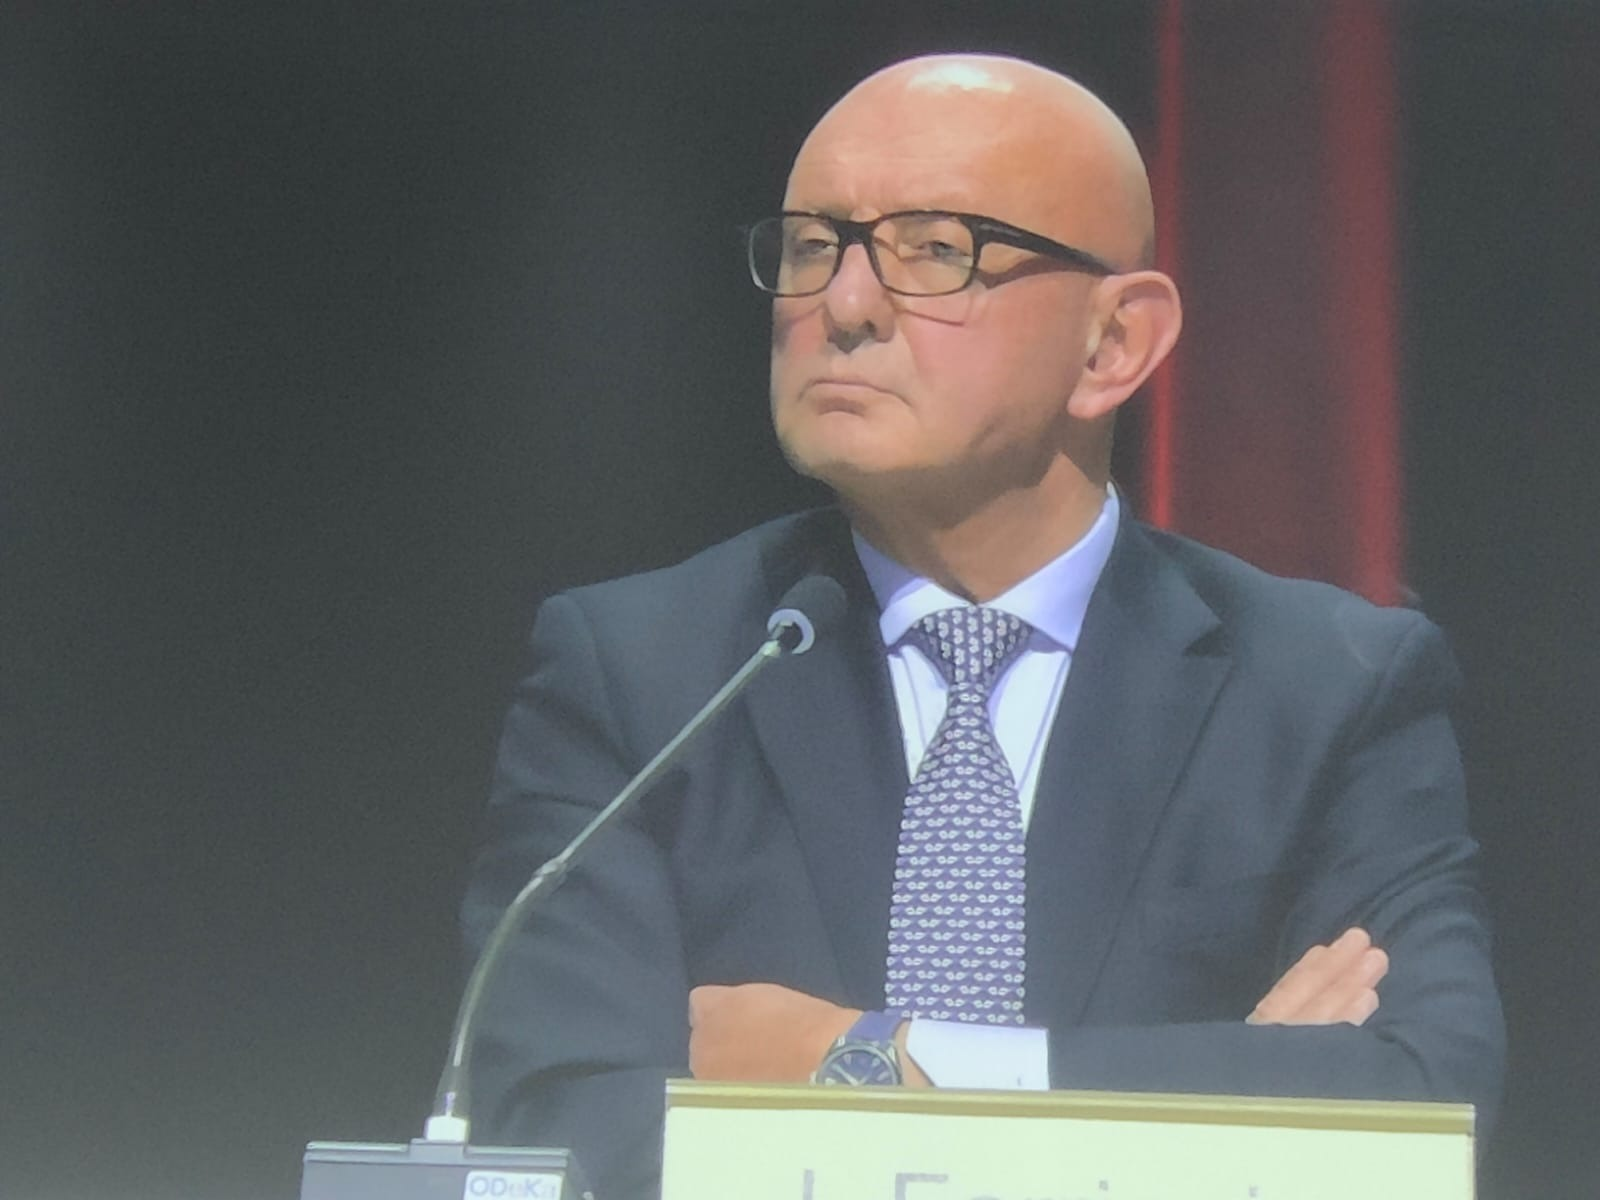 The Global Association of International Sports Federations, under its President Ivo Ferriani, was officially dissolved in Lausanne tonight ©ITG